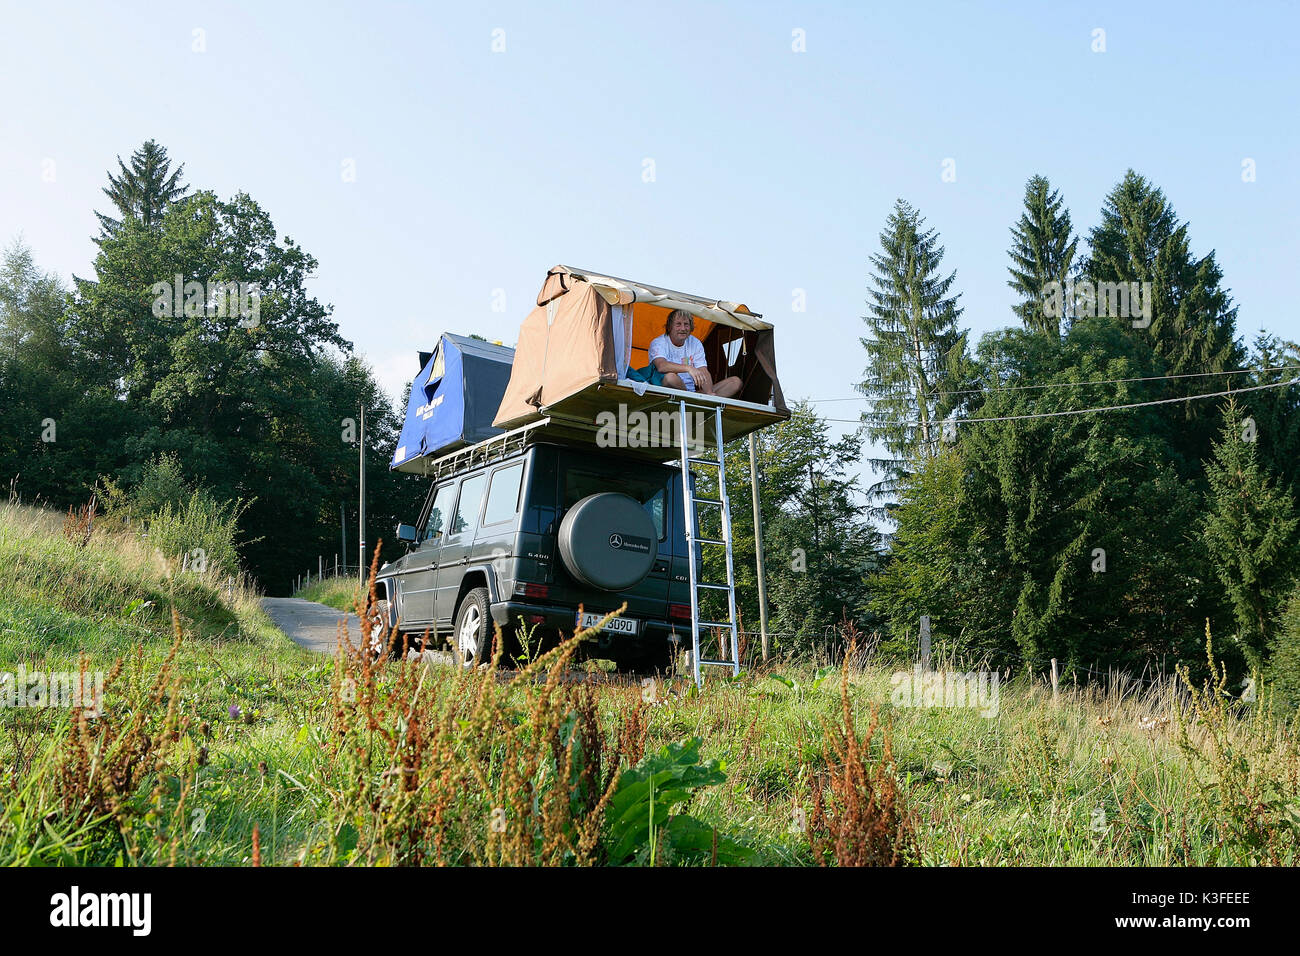 Roof tent on sport utility vehicle Stock Photo